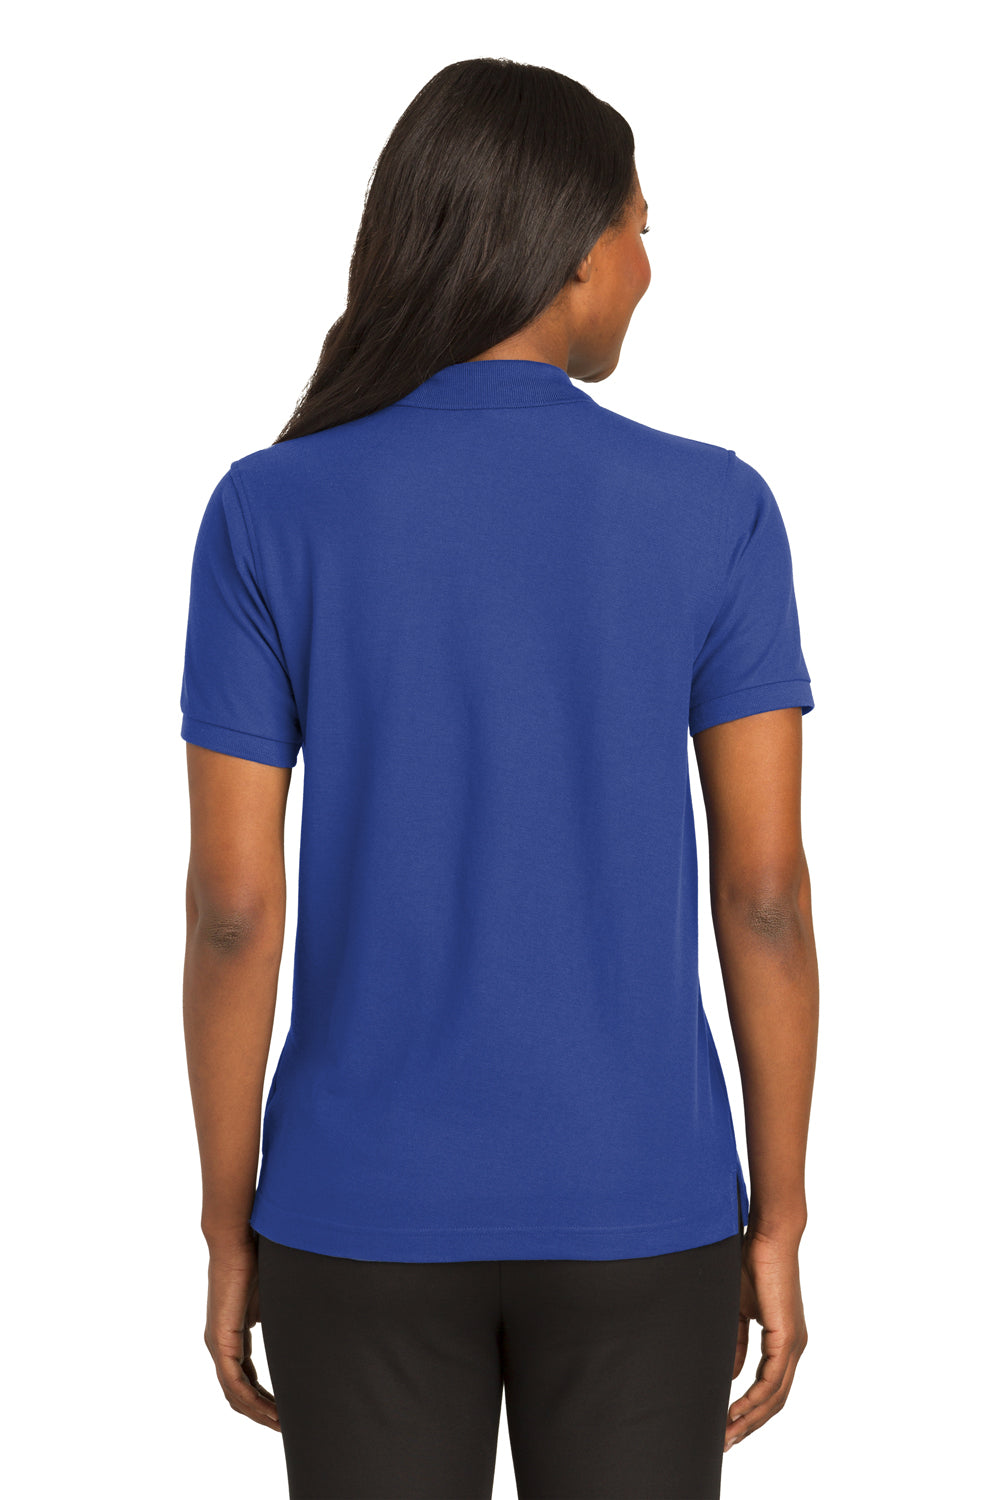 Port Authority L500 Womens Silk Touch Wrinkle Resistant Short Sleeve Polo Shirt Royal Blue Back